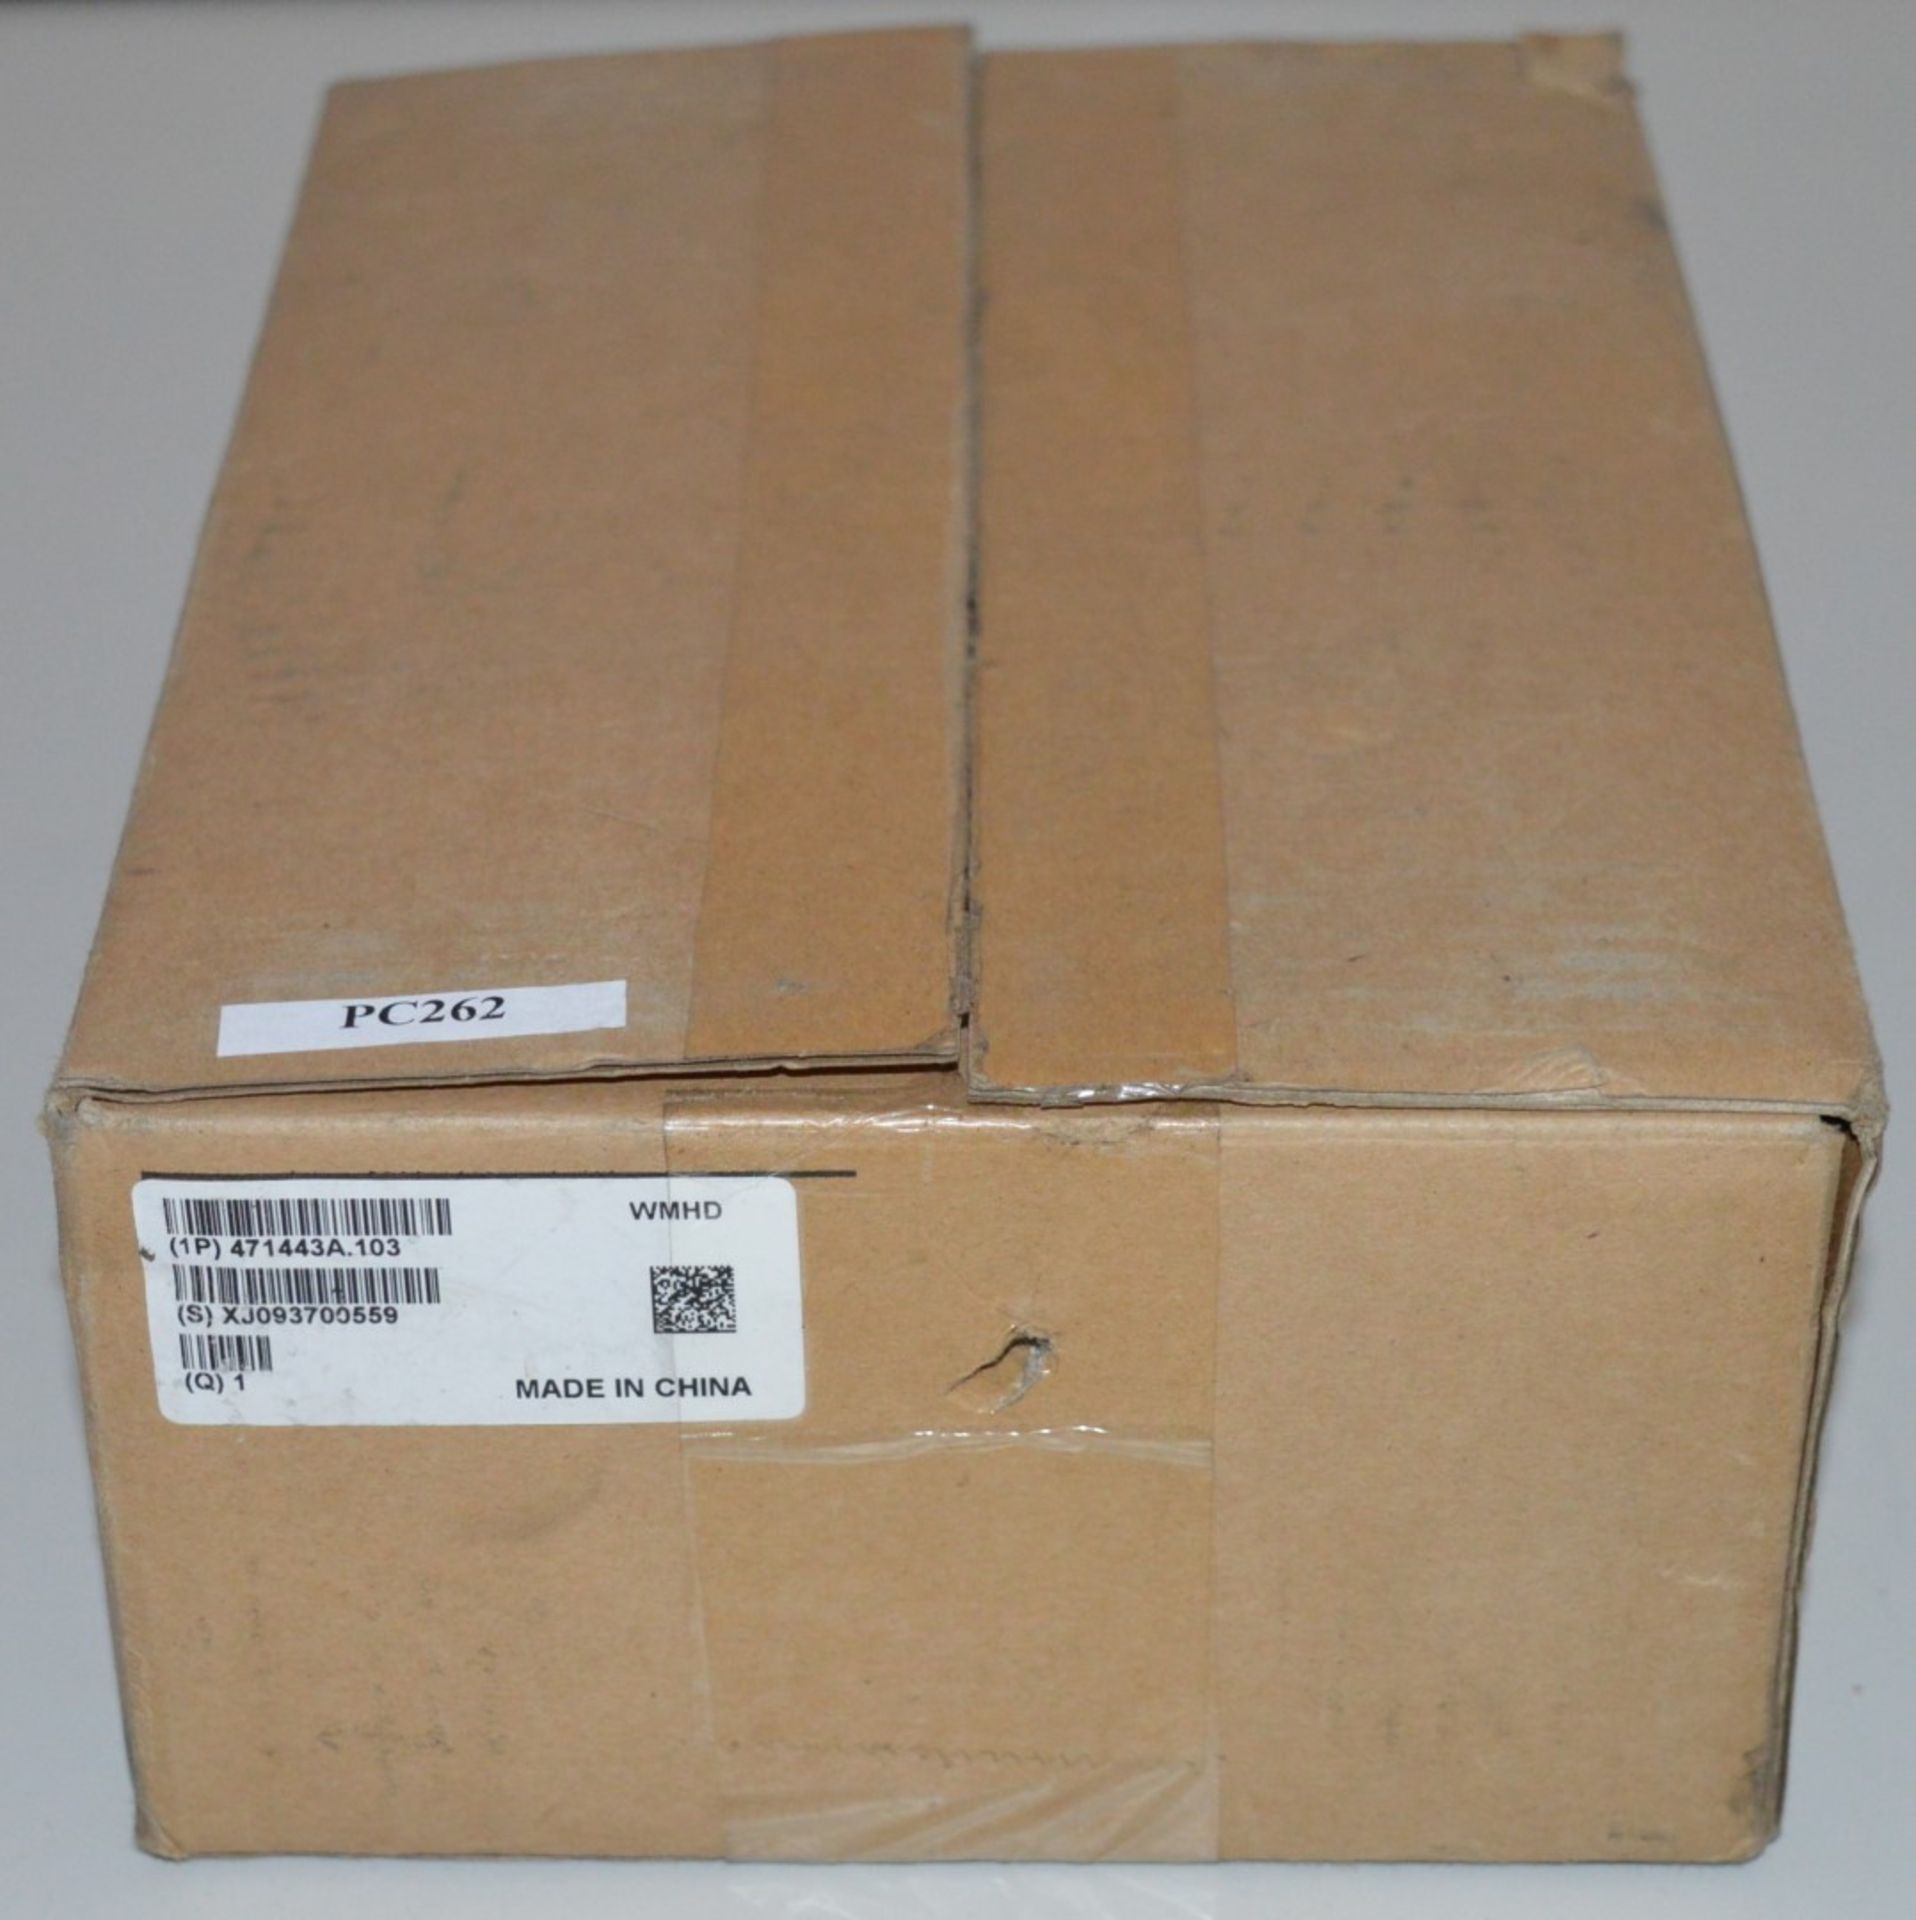 1 x Nokia Siemens Networks WMHD 471443A.103 Transcoder - Unused Boxed Stock - CL300 - Ref PC263 - - Image 2 of 6